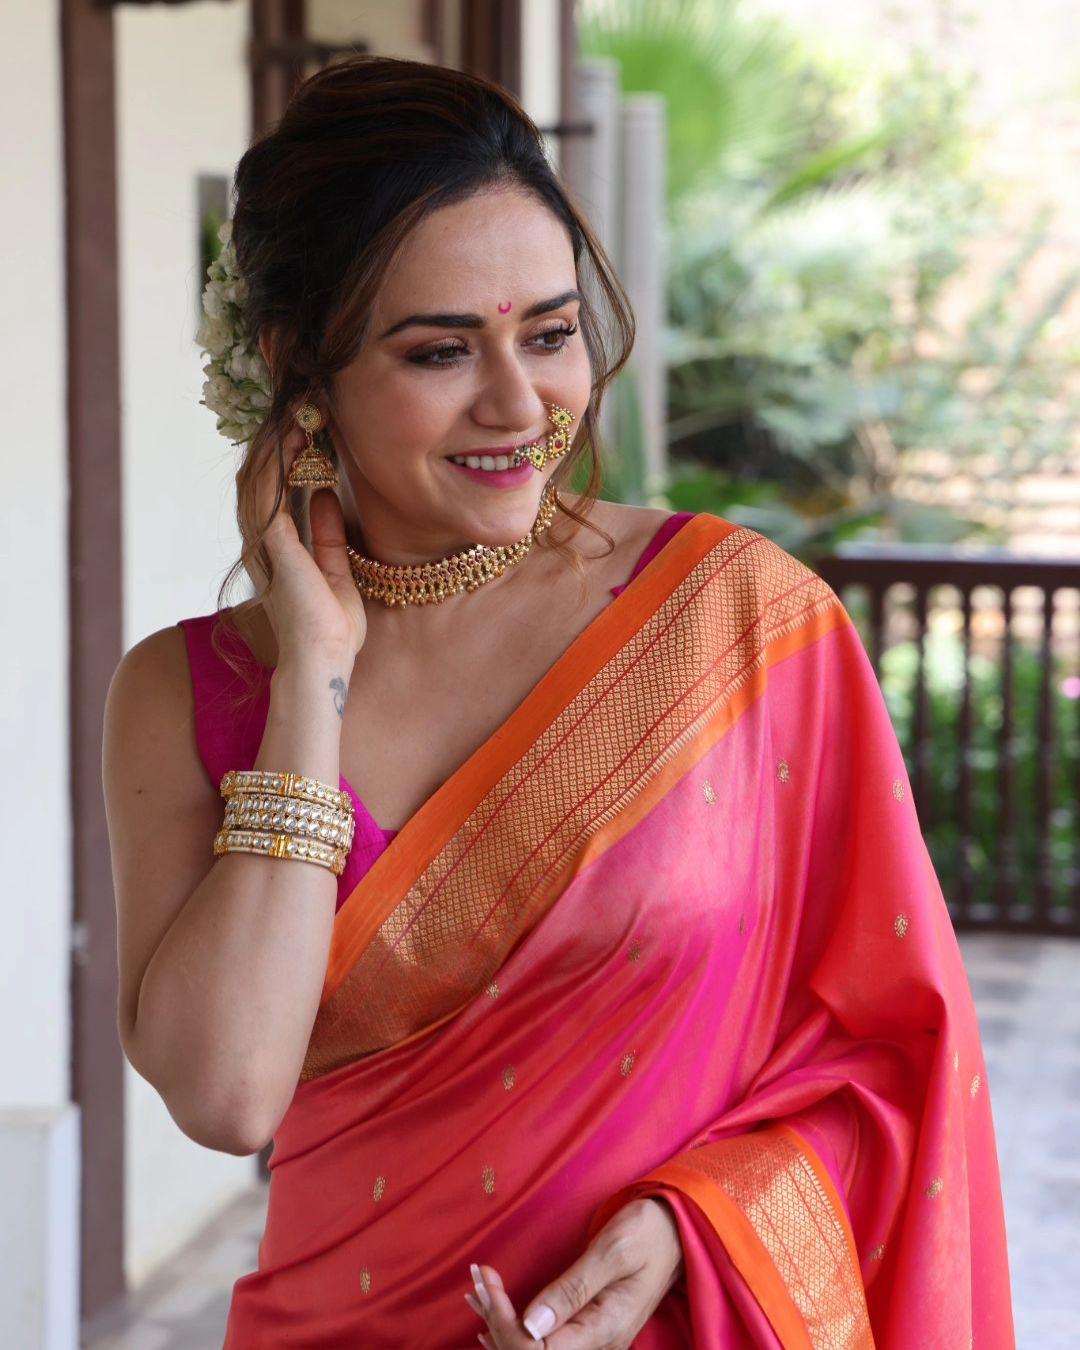  Amruta wore intricate jewellery to elevate her appearance. The actress's golden choker, small jhumkas, and big nath were a total hit